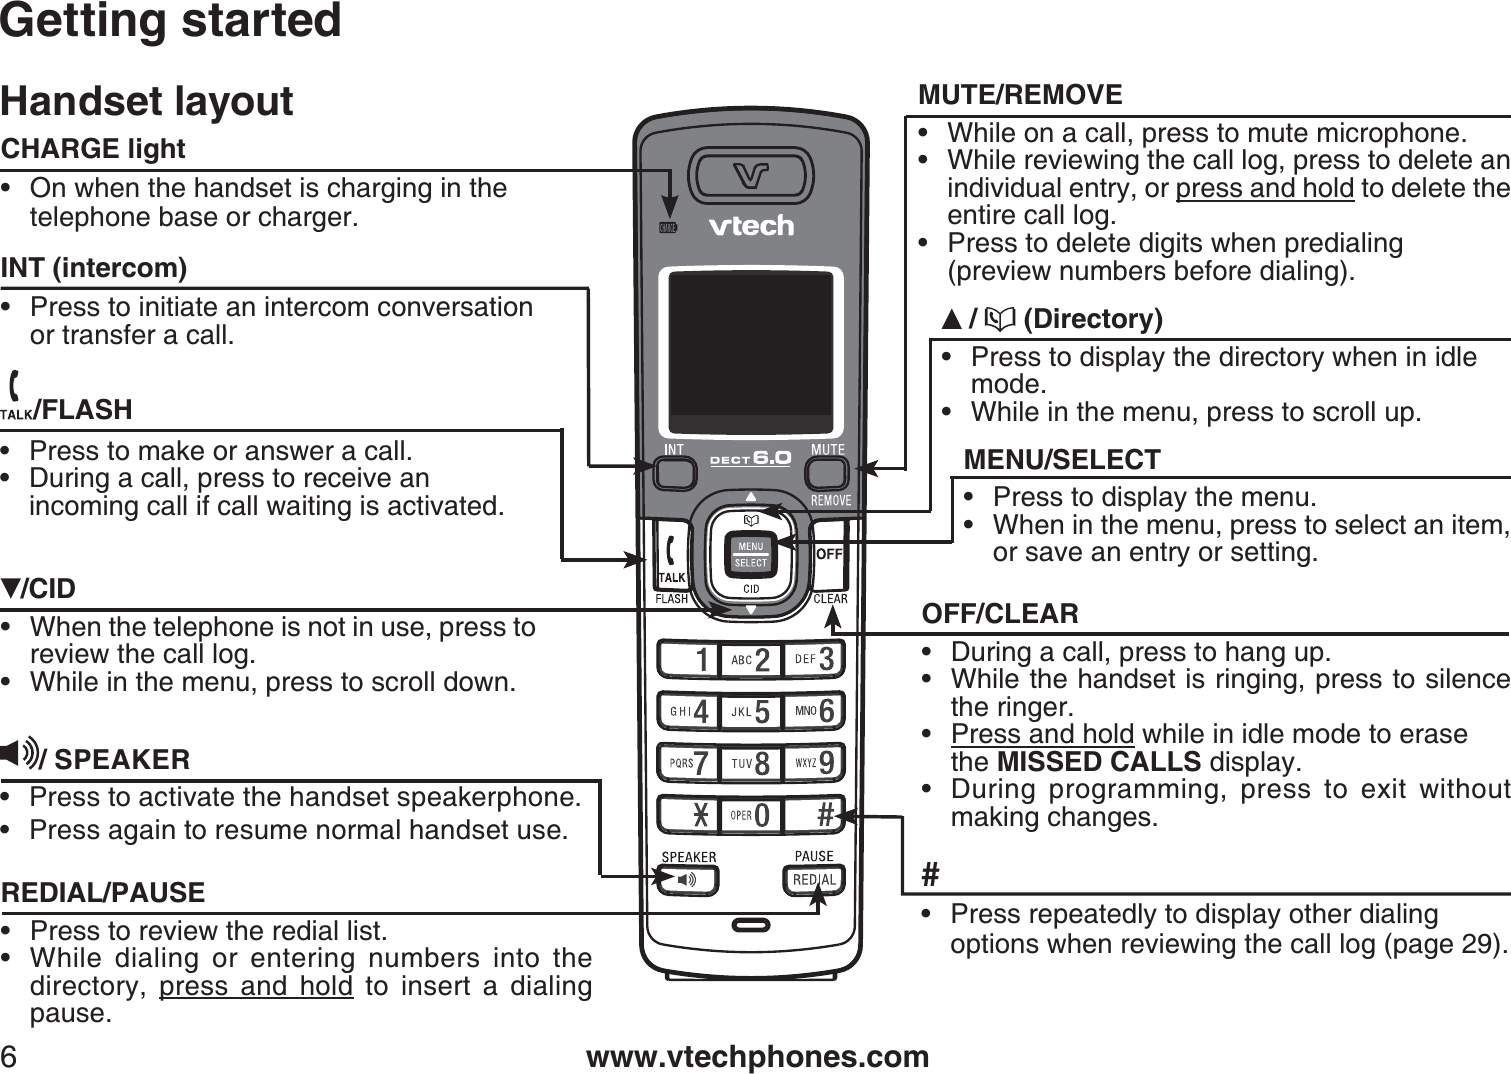 www.vtechphones.com6Handset layoutGetting started/CID• When the telephone is not in use, press to review the call log.While in the menu, press to scroll down.•/FLASH• Press to make or answer a call.• During a call, press to receive an incoming call if call waiting is activated./  (Directory)• Press to display the directory when in idlemode.While in the menu, press to scroll up.•MENU/SELECT• Press to display the menu.• When in the menu, press to select an item,or save an entry or setting.OFF/CLEAR• During a call, press to hang up.• While the handset is ringing, press to silencethe ringer.•Press and hold while in idle mode to erase the MISSED CALLS display.• During programming, press to exit without making changes.REDIAL/PAUSE• Press to review the redial list.• While dialing or entering numbers into the directory, press and hold to insert a dialing pause.CHARGE light• On when the handset is charging in the telephone base or charger.#• Press repeatedly to display other dialingoptions when reviewing the call log (page 29).INT (intercom)• Press to initiate an intercom conversationor transfer a call./ SPEAKERPress to activate the handset speakerphone.Press again to resume normal handset use.••MUTE/REMOVE• While on a call, press to mute microphone.• While reviewing the call log, press to delete an individual entry, or press and hold to delete the entire call log.•Press to delete digits when predialing(preview numbers before dialing).